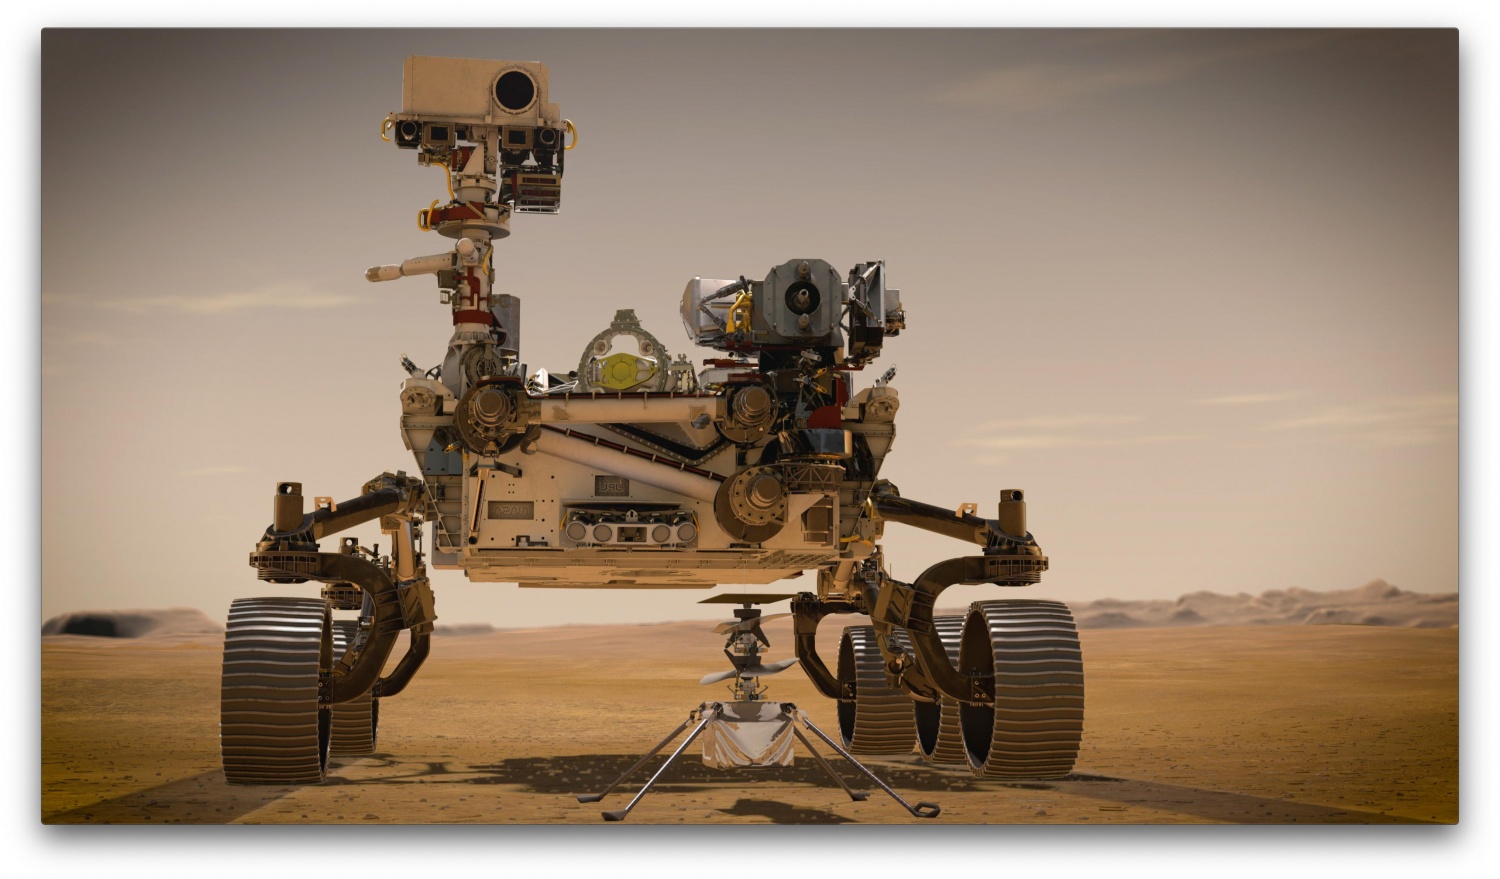 NASA’s Rover Perseverance gears up to drop ingenuity from its belly next month